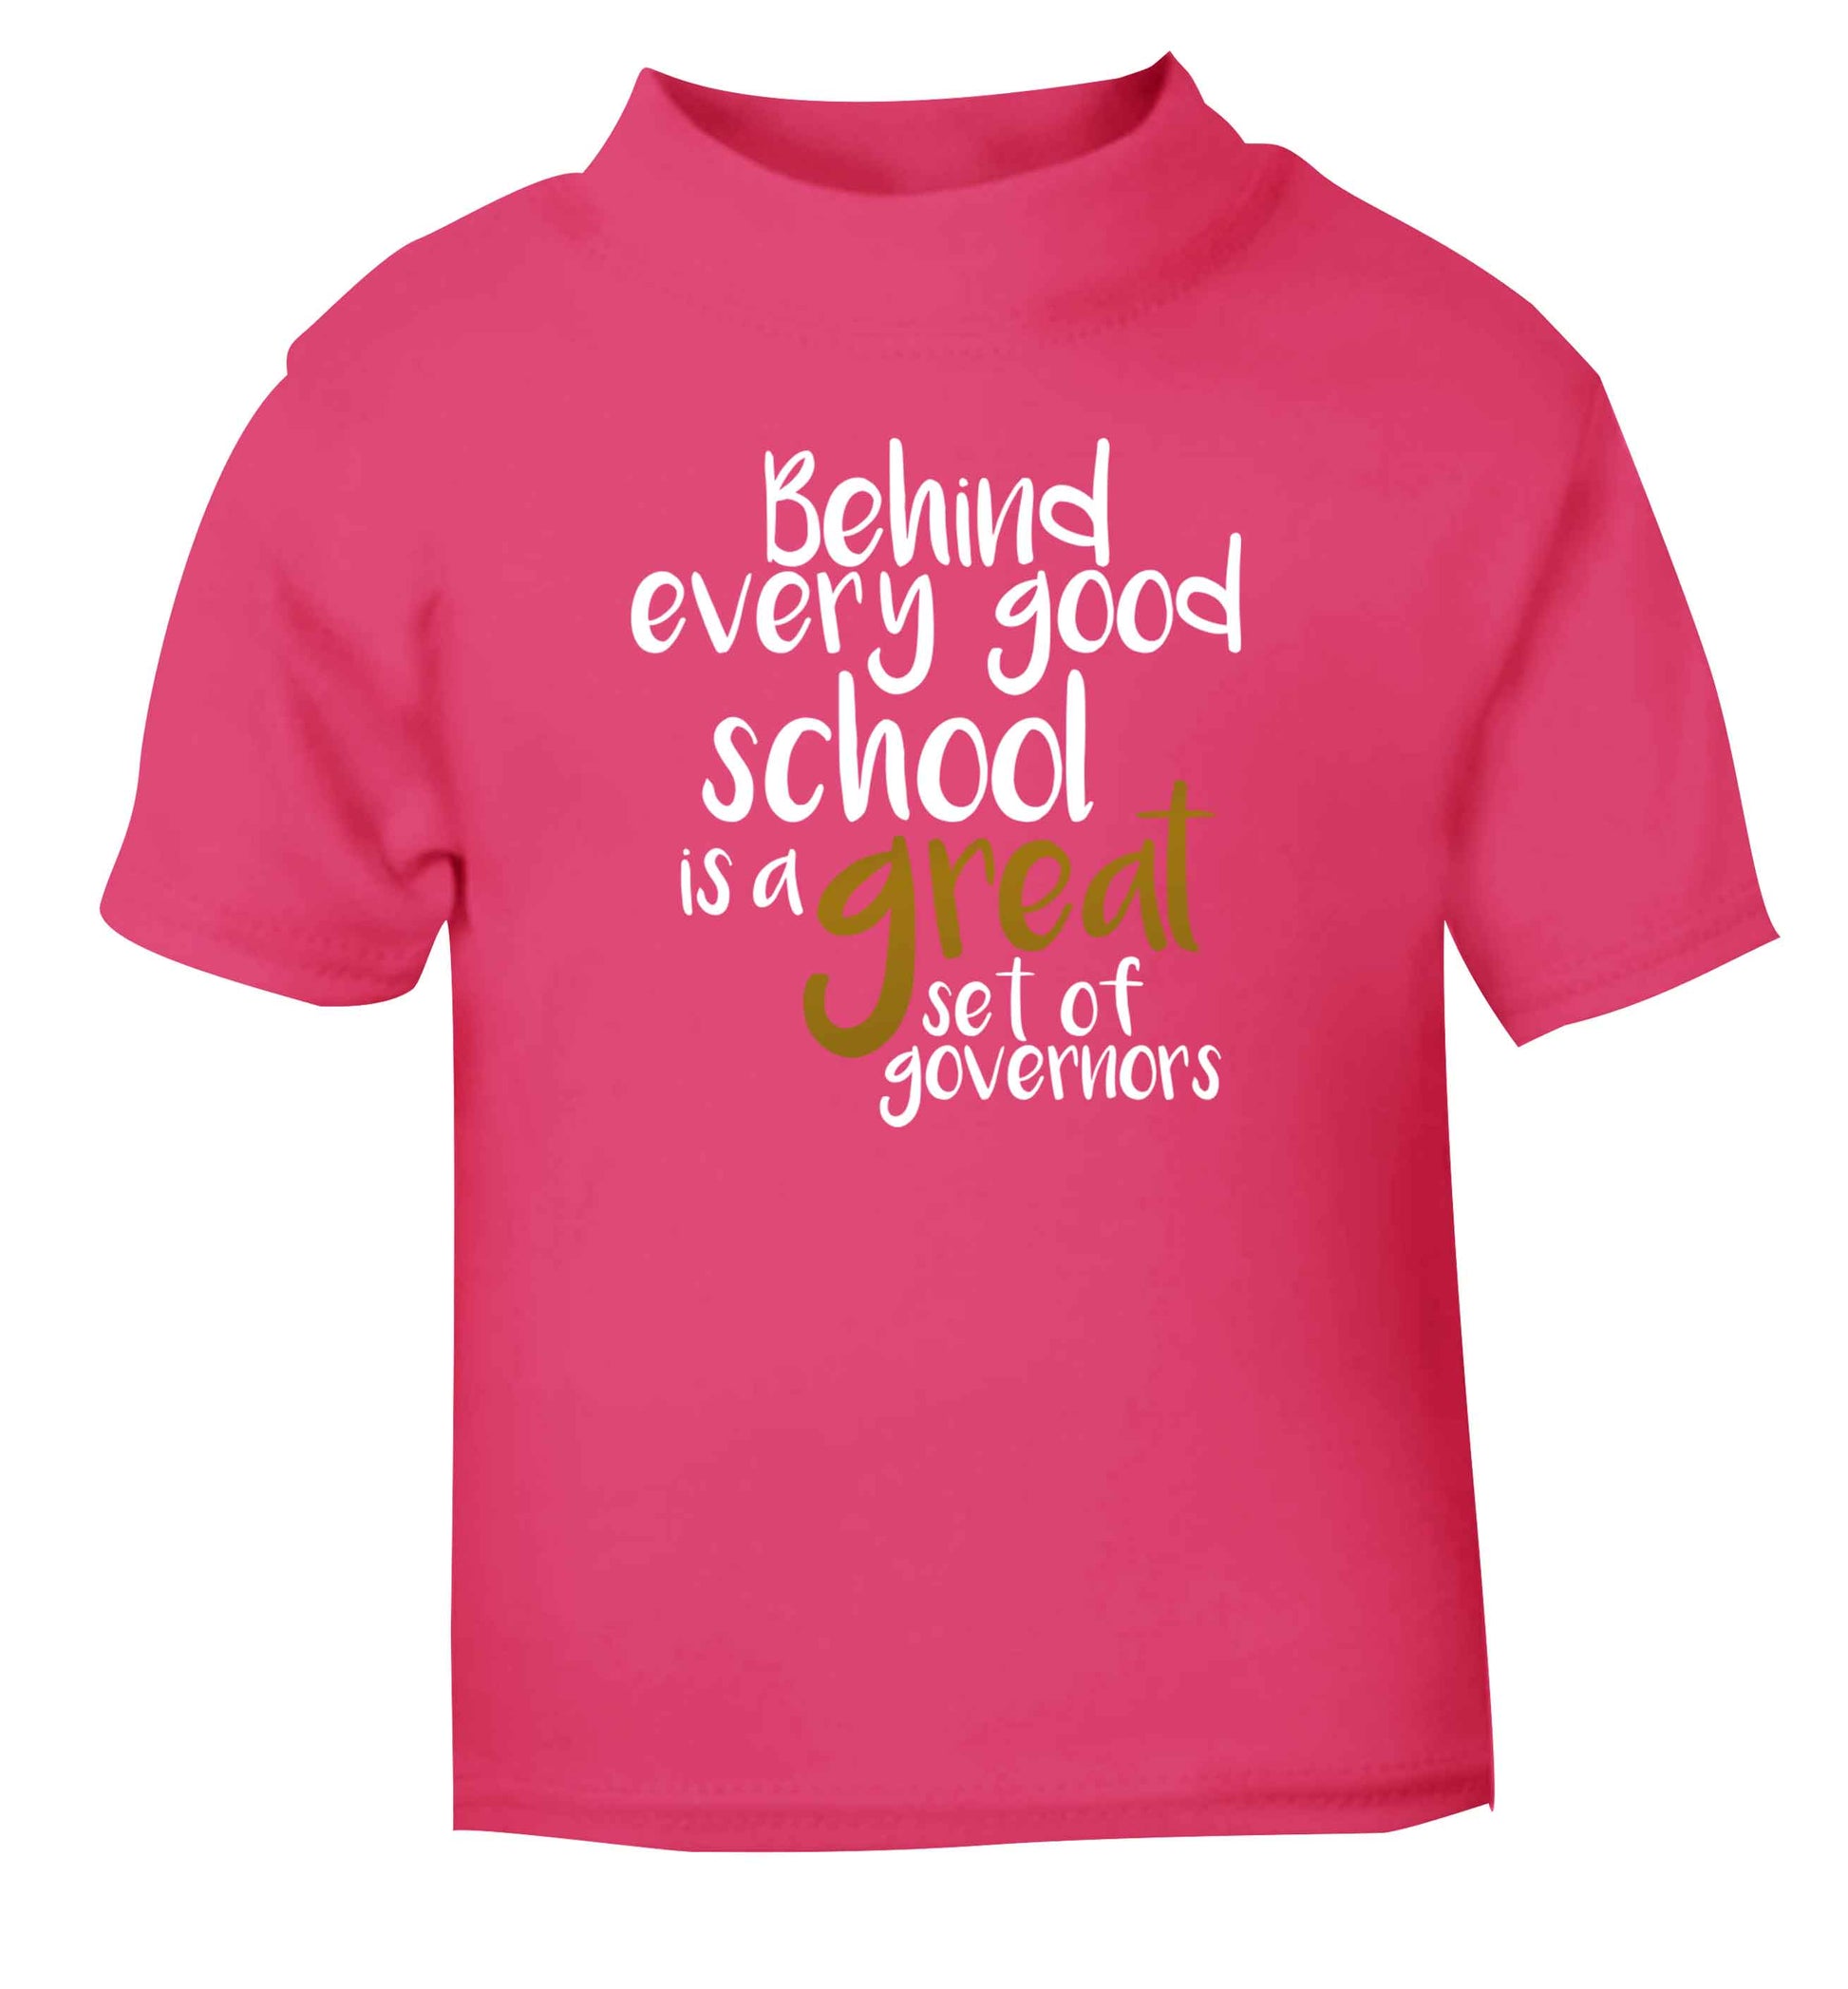 Behind every good school is a great set of governors pink Baby Toddler Tshirt 2 Years